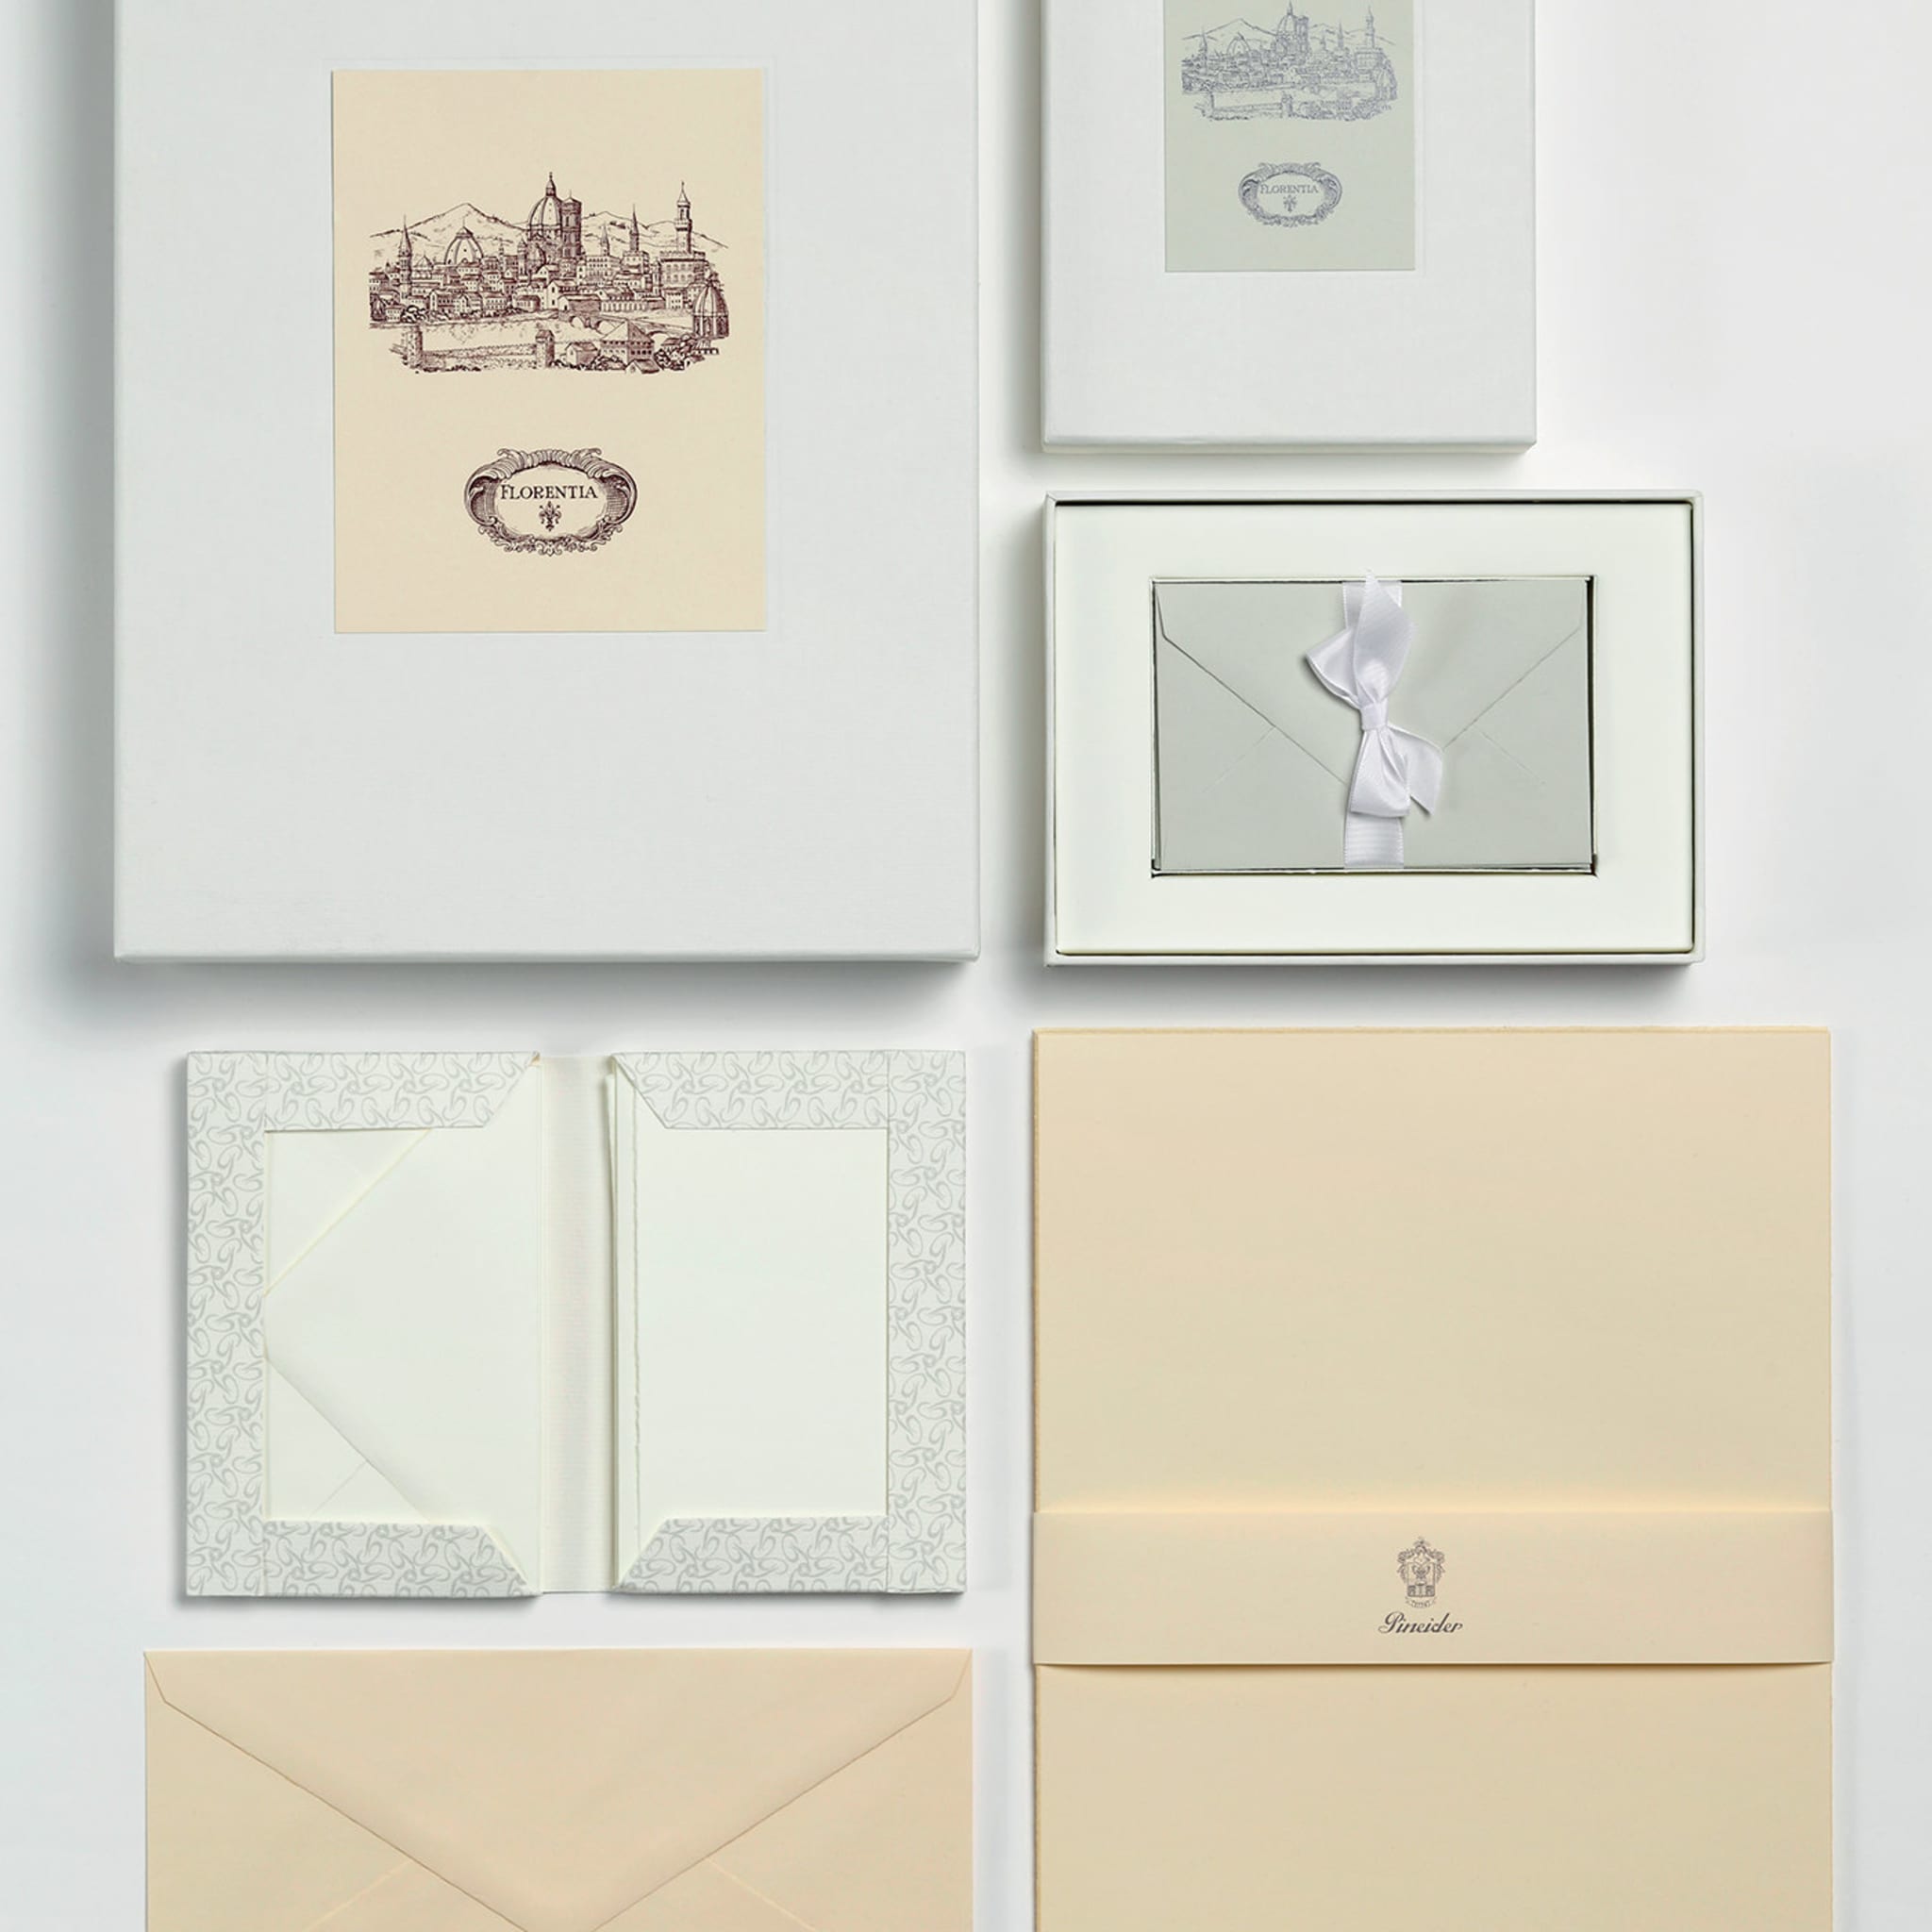 Florentia Set of Sheets and Envelopes 297 x 210 mm - Alternative view 1